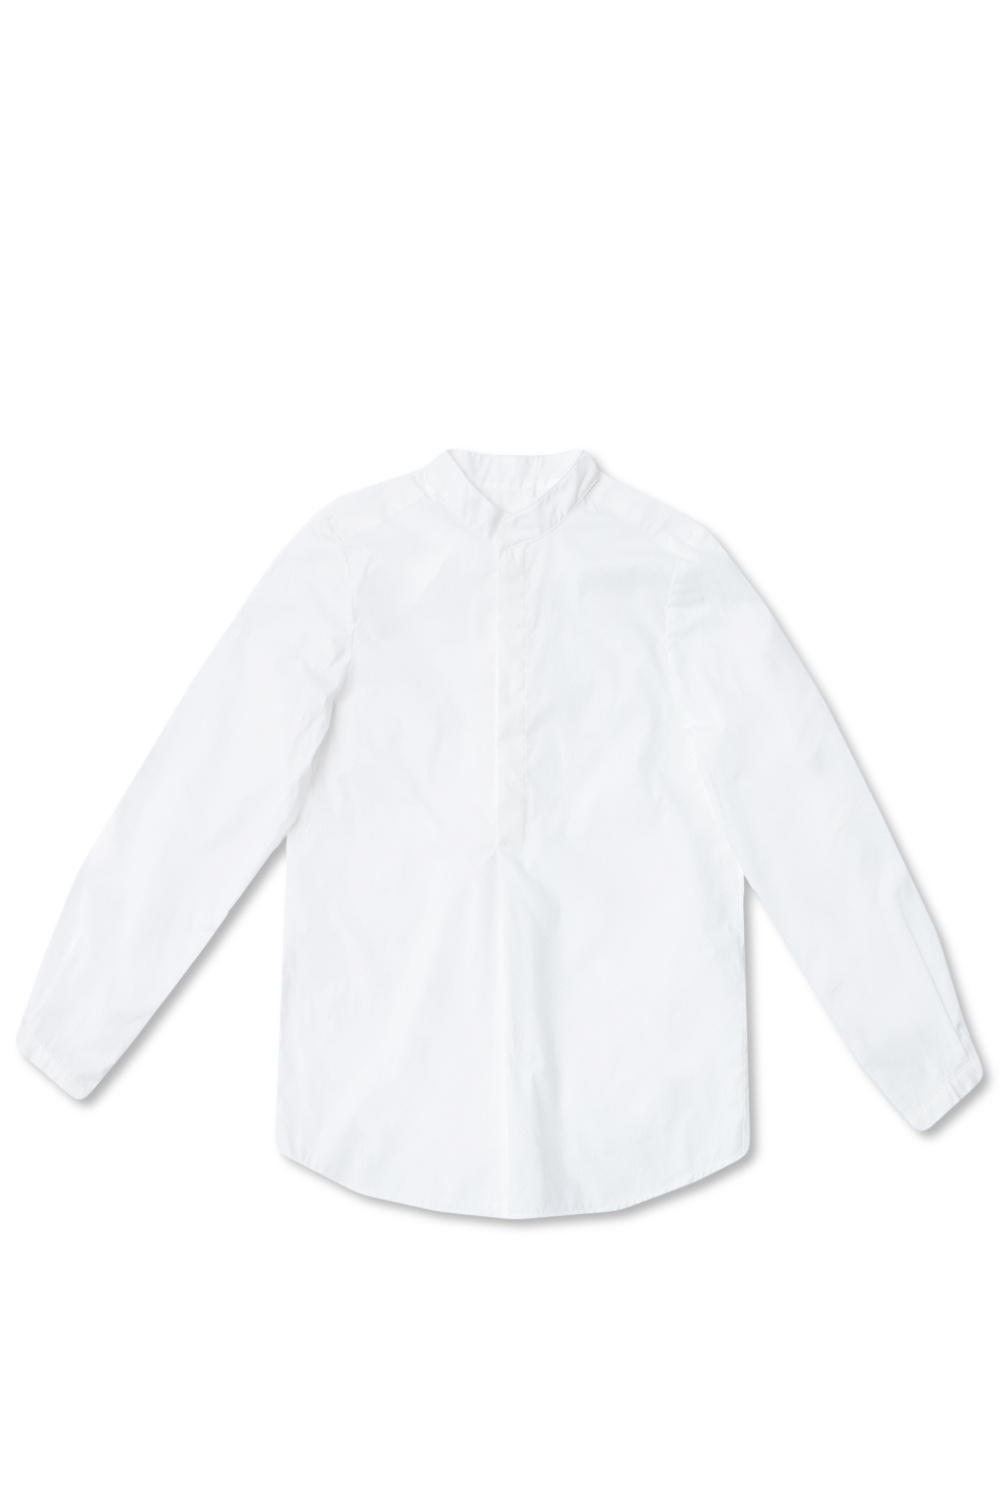 Bonpoint  Shirt with band collar